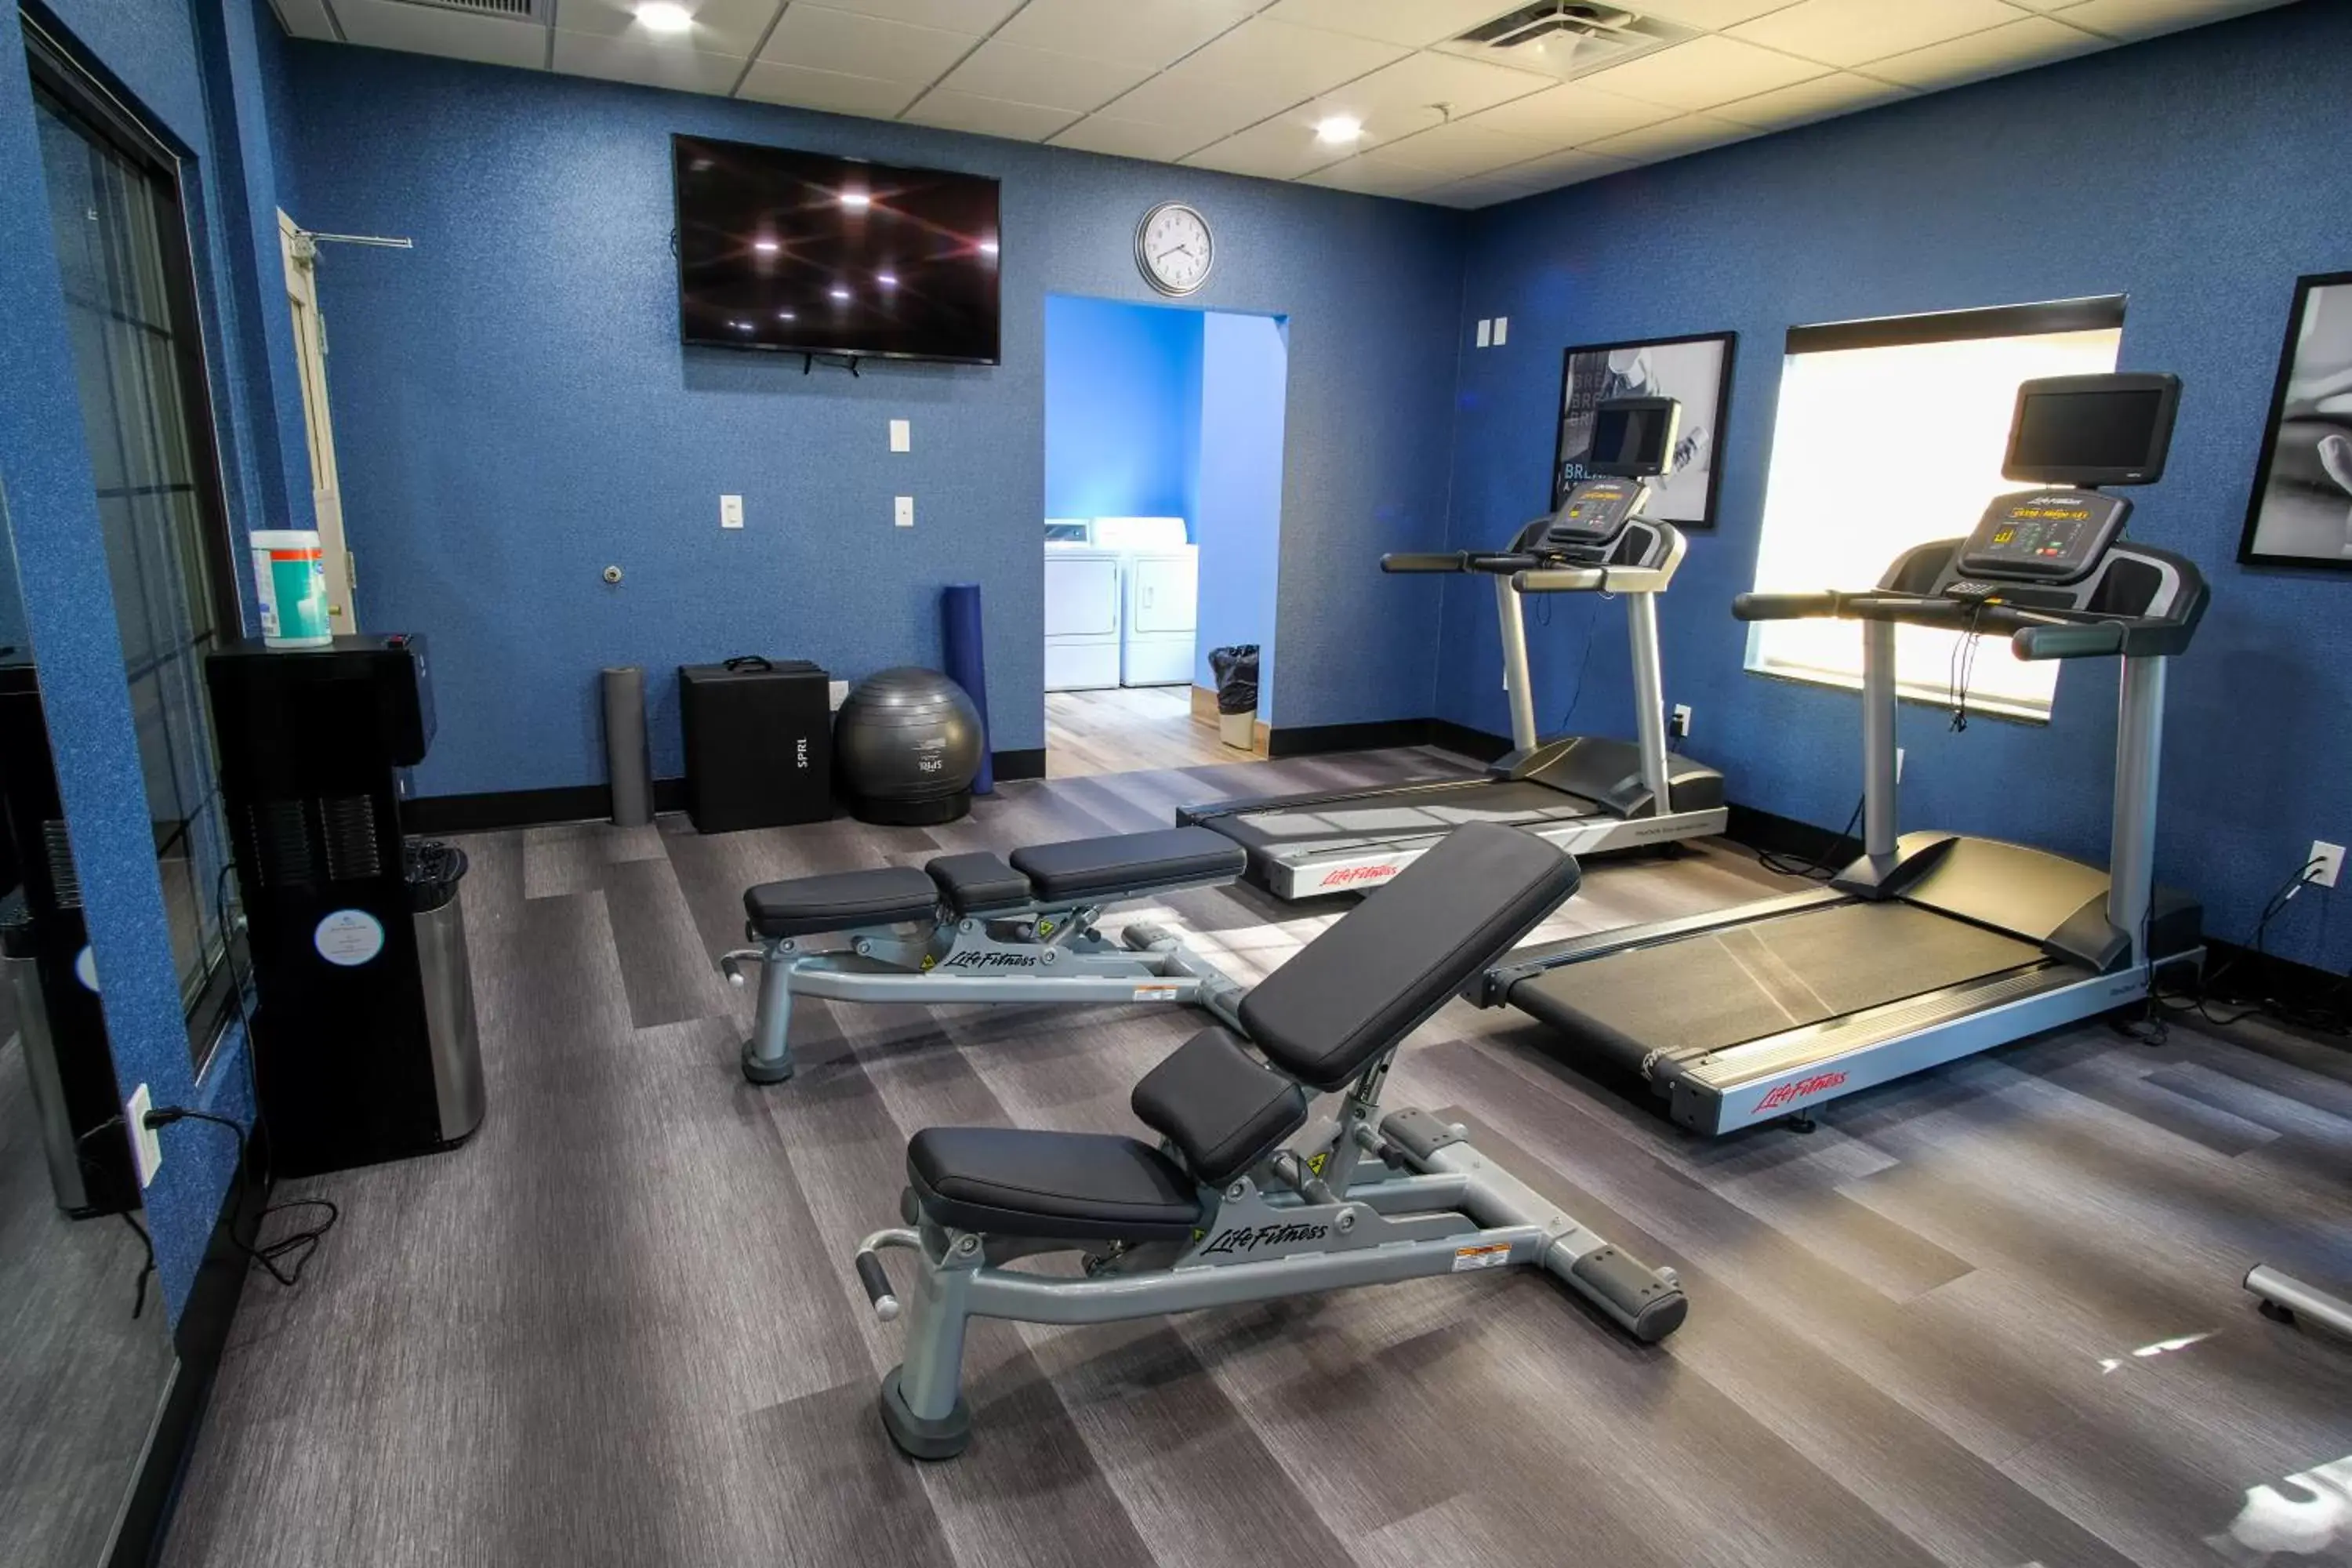 Fitness centre/facilities, Fitness Center/Facilities in Staybridge Suites Quantico-Stafford, an IHG Hotel